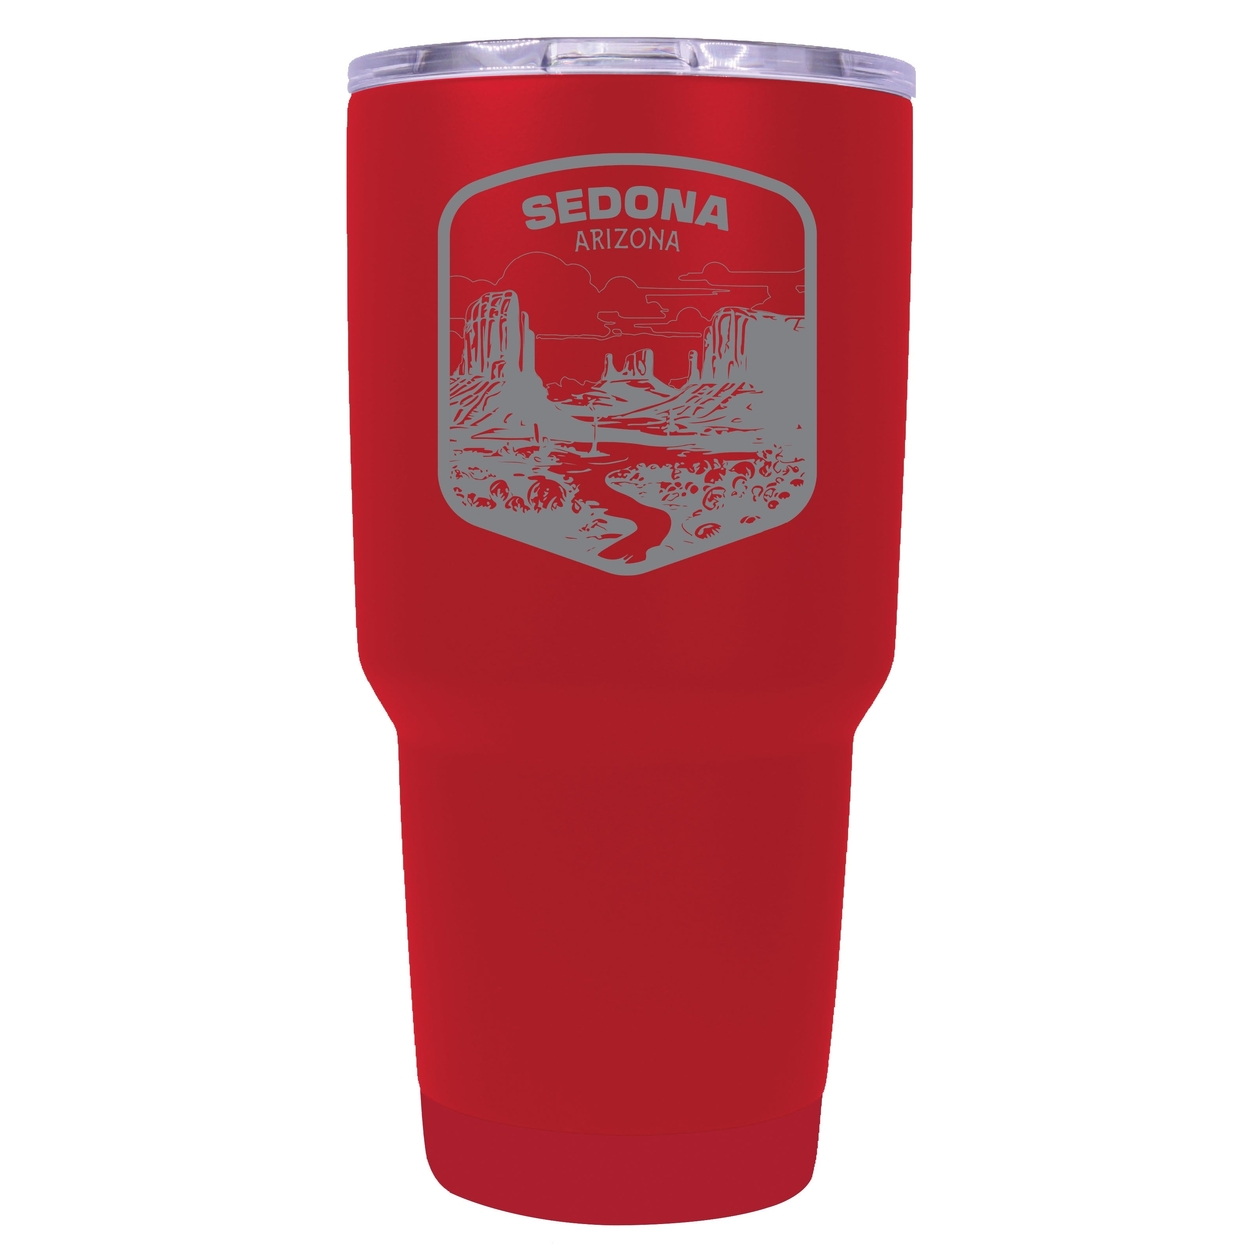 Sedona Arizona Souvenir 24 Oz Engraved Insulated Stainless Steel Tumbler - Red,,4-Pack